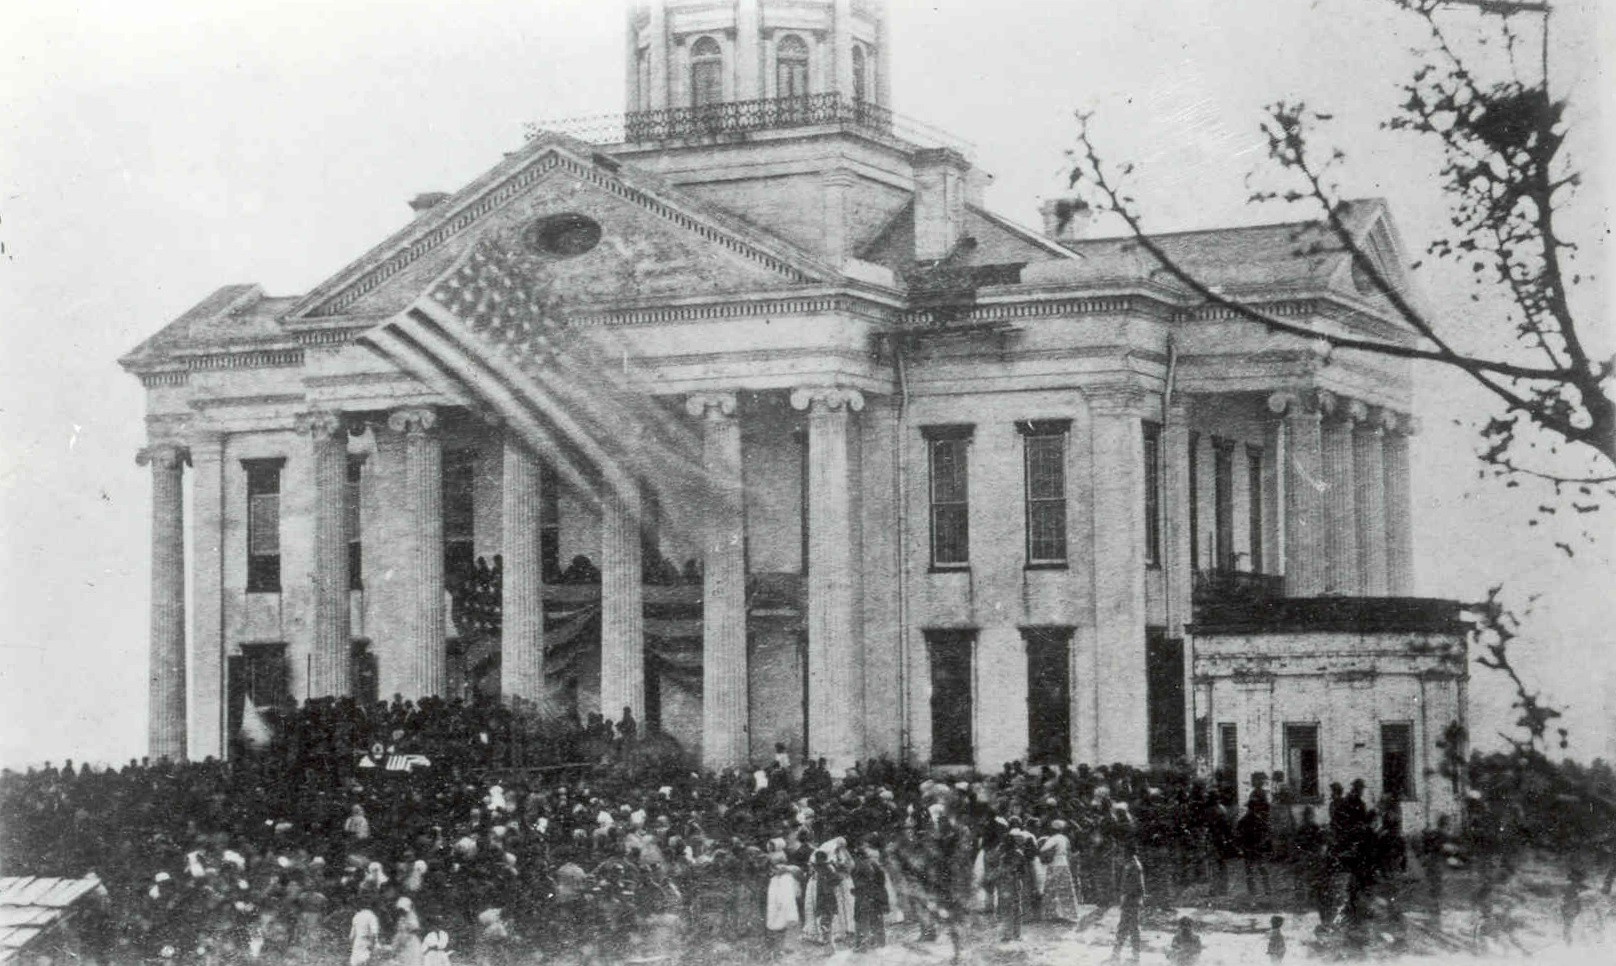 A large crowd of mostly African Americans mourning the death of President Abraham Lincoln in front of the Warren County Courthouse in Vicksburg, Mississippi, April 1865